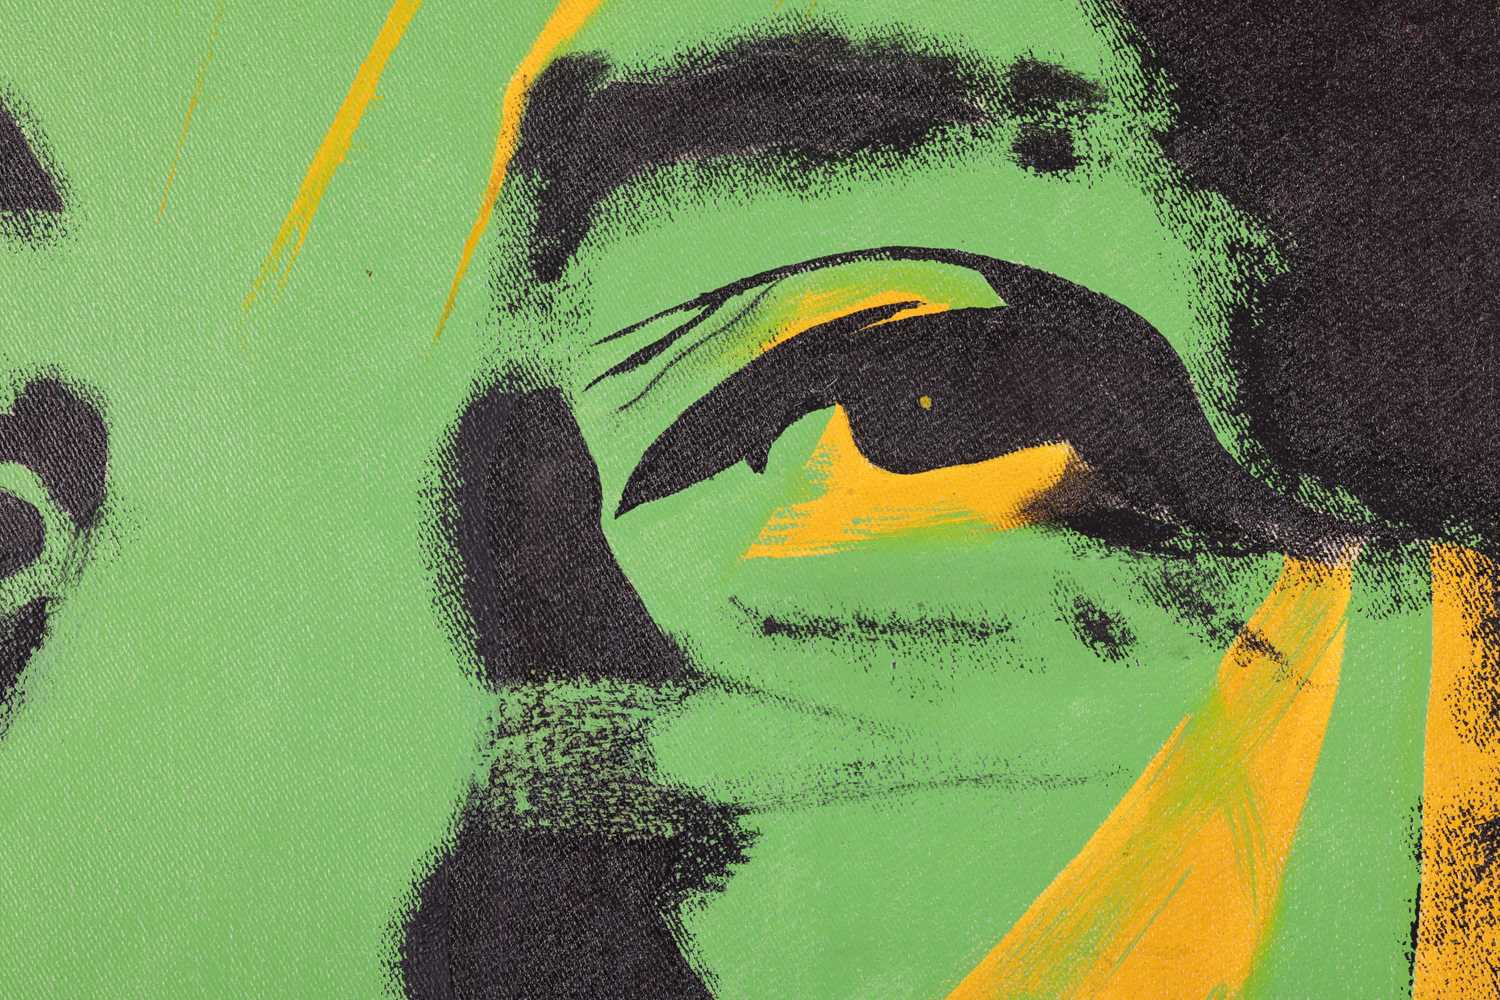 After Andy Warhol (American, 1928 - 1987), Mao 1972 (Green), unsigned, oil on canvas, 100 x 100 cm,  - Image 7 of 9